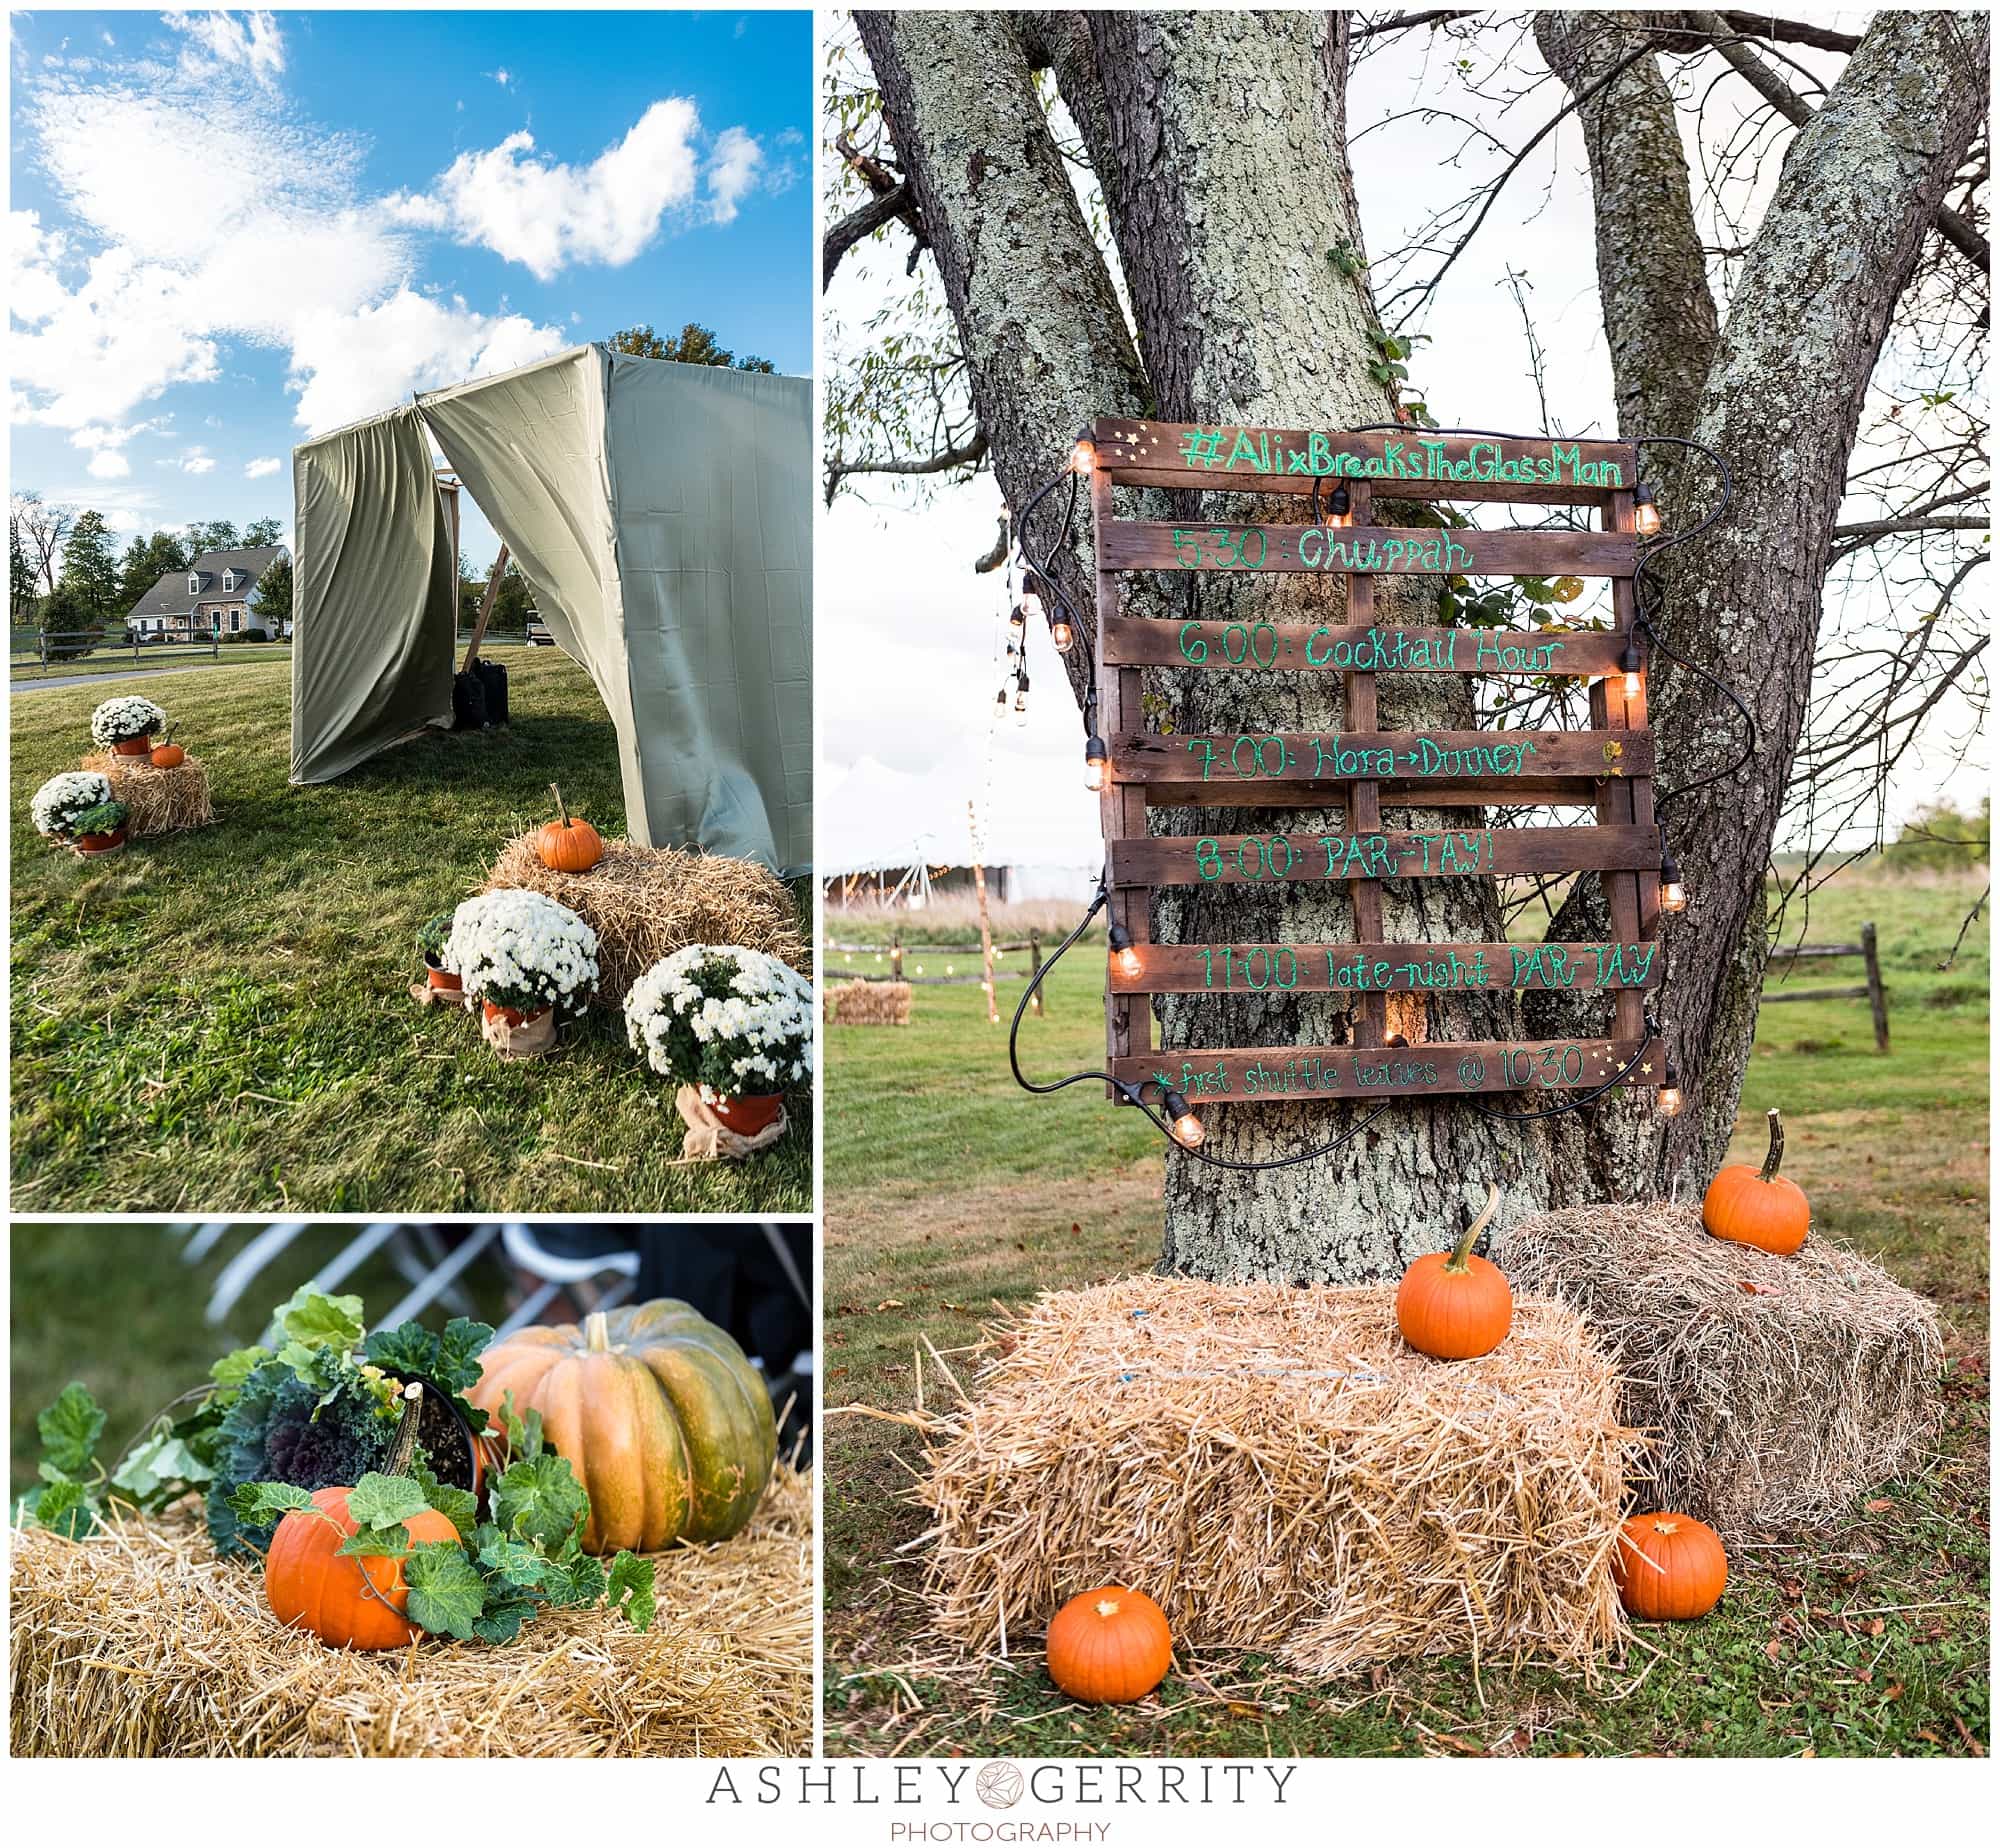 Hand-painted direction sign nailed to a tree, autumn wedding decorations include hay bales, pumpkins, gourds, & mums.